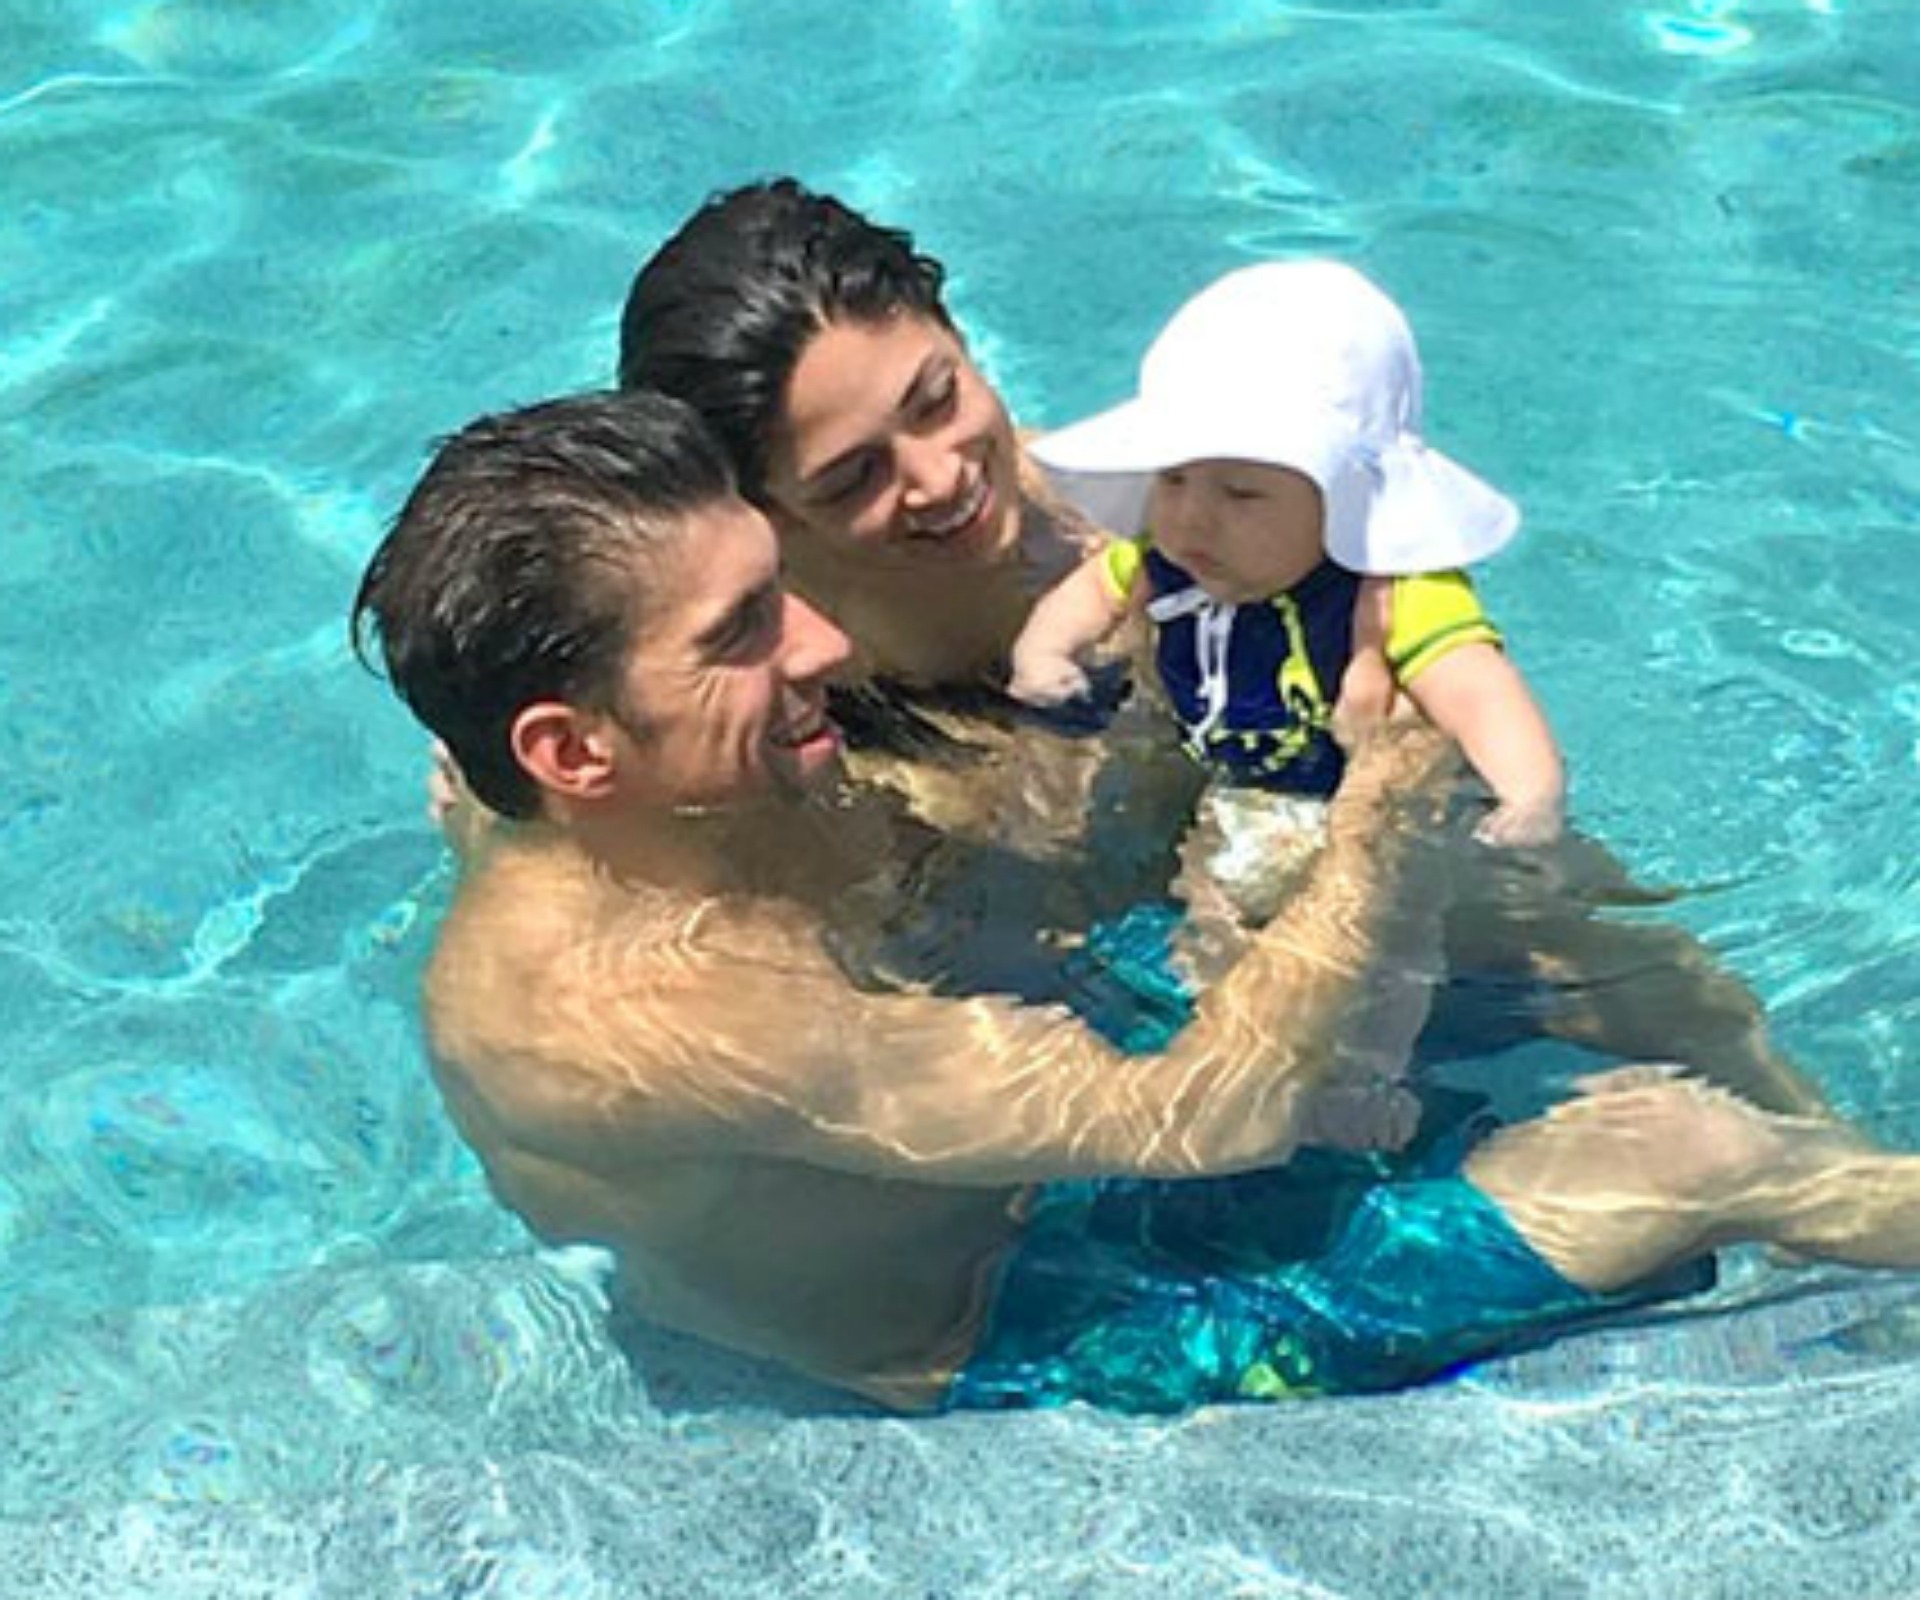 Michael Phelps shares first photo of retirement with baby Boomer